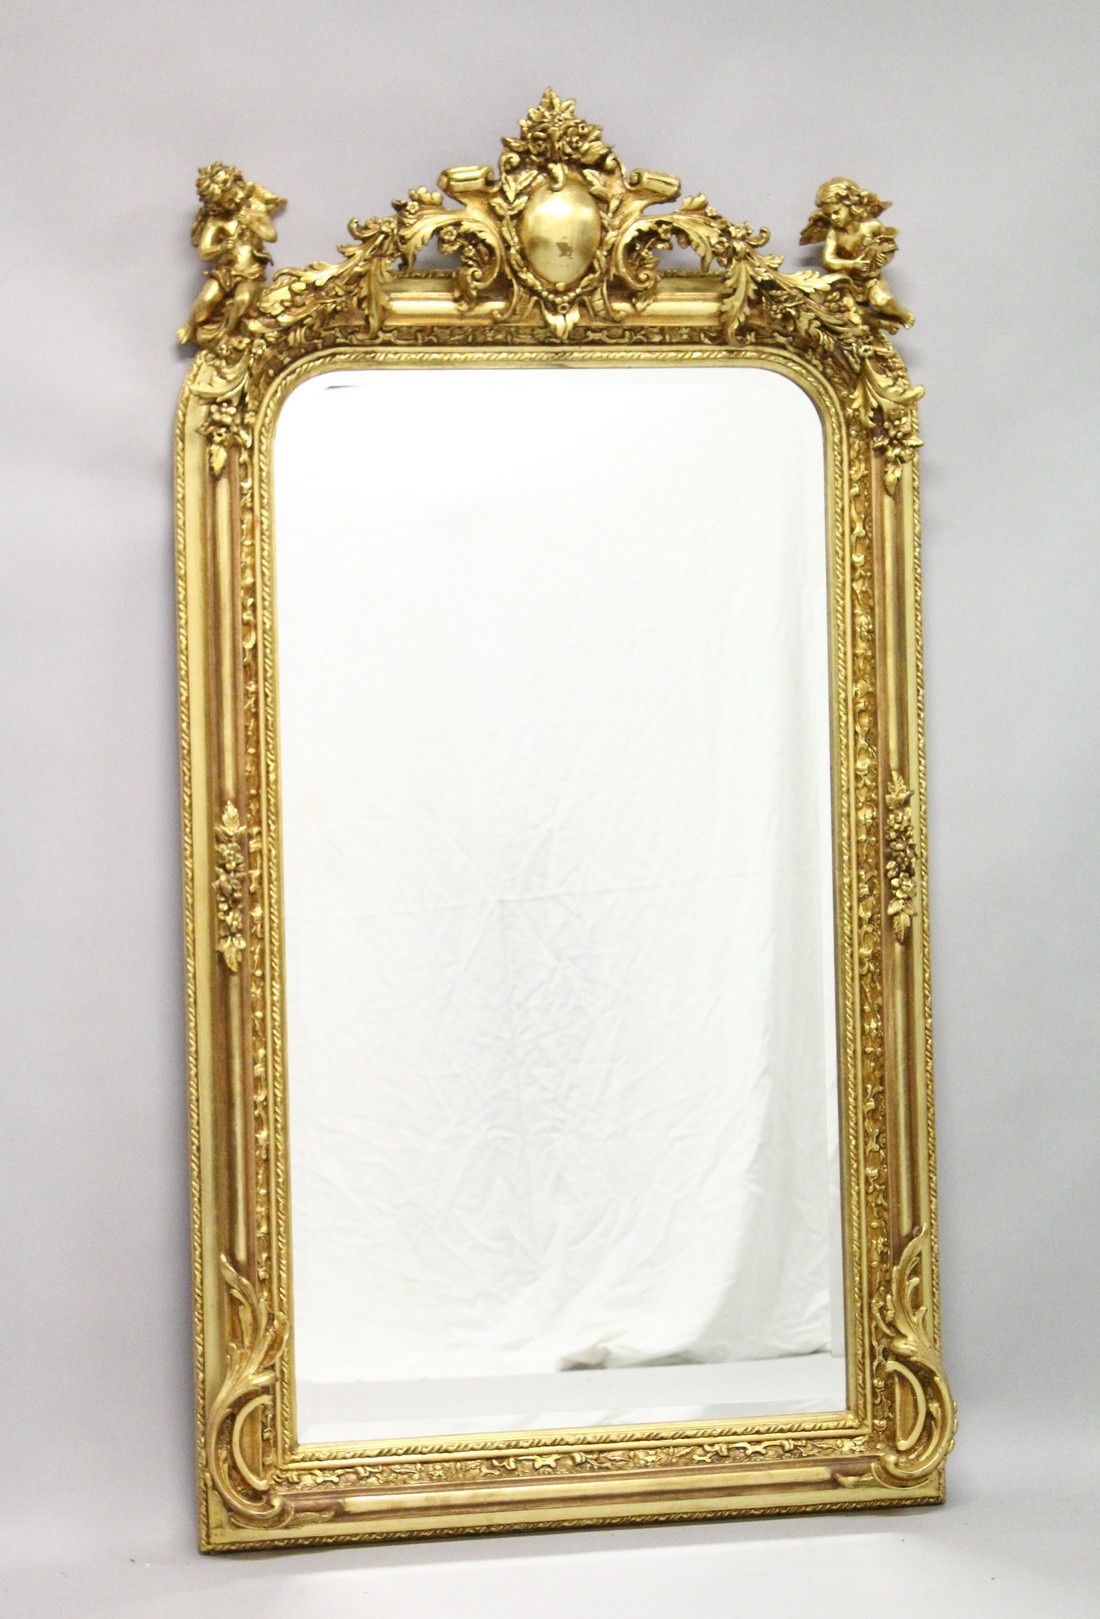 A LARGE DECORATIVE GILT FRAMED MIRROR, the shaped top mounted with cherubs. 5ft 3ins high x 2ft 9ins